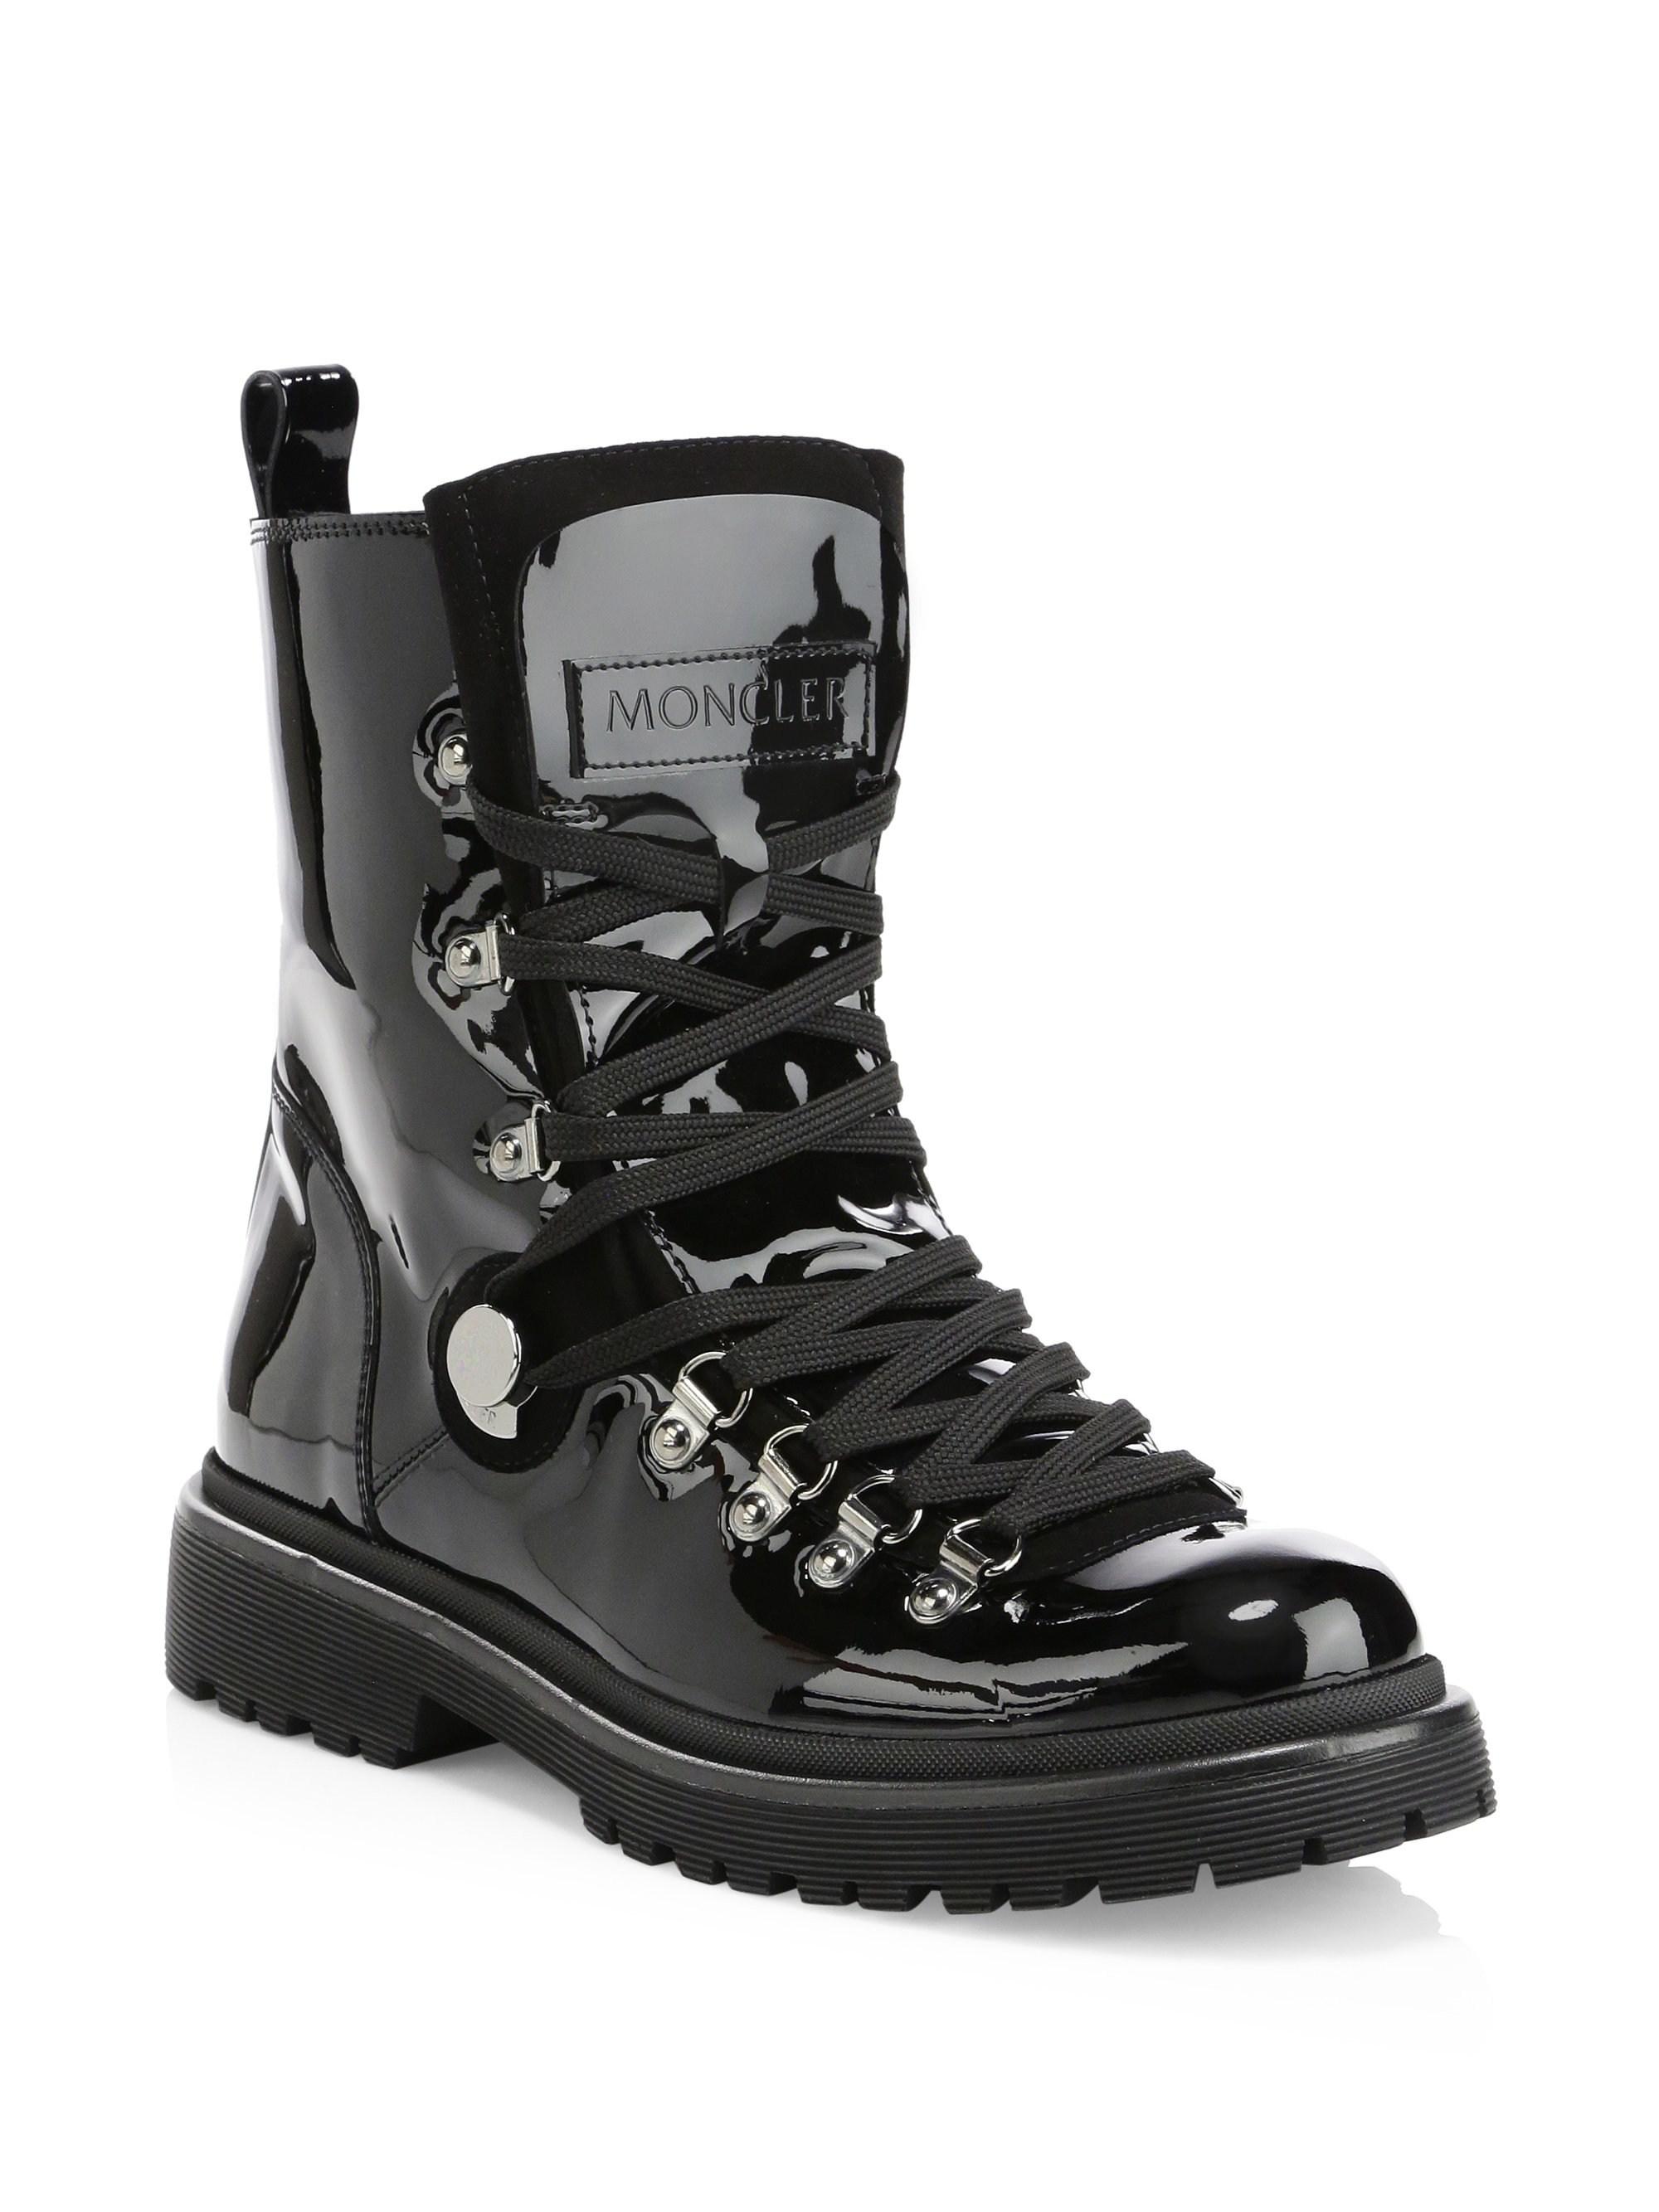 Moncler Patent Leather Combats Boots in Black | Lyst